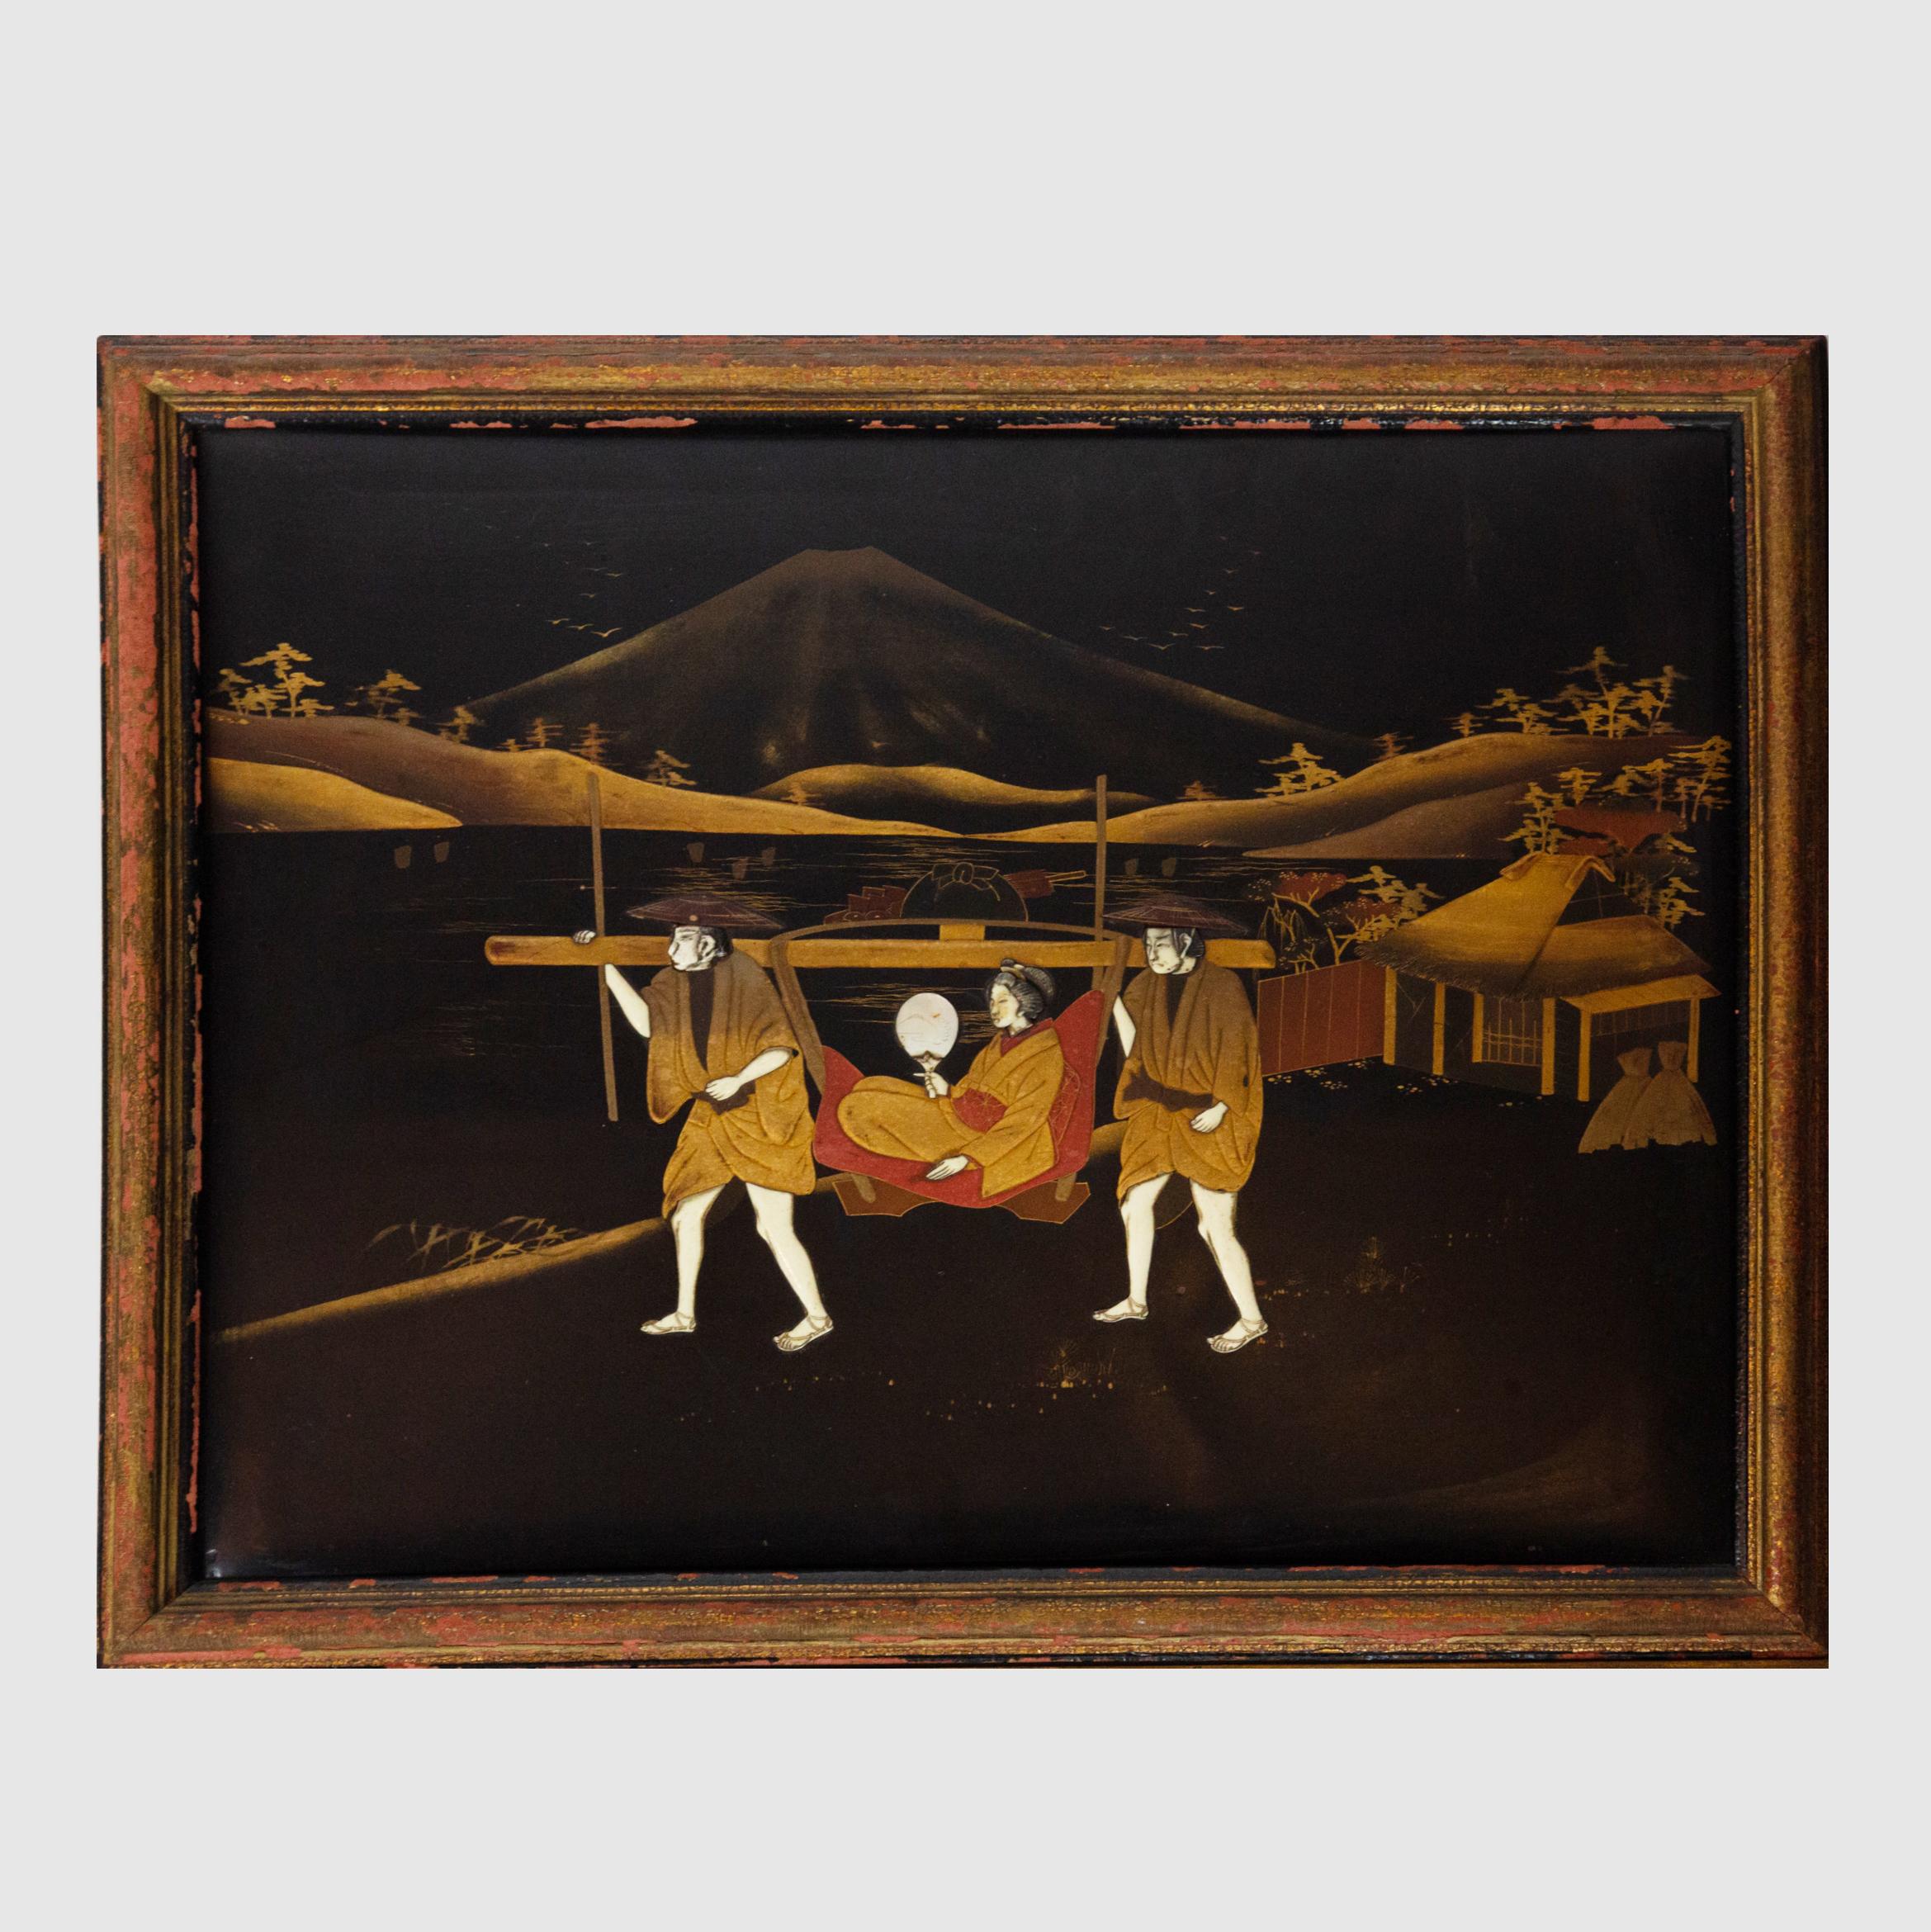 Pair of Japanese lacquered and inlaid plaques. Figures in landscape on black lacquer. Measures: 17